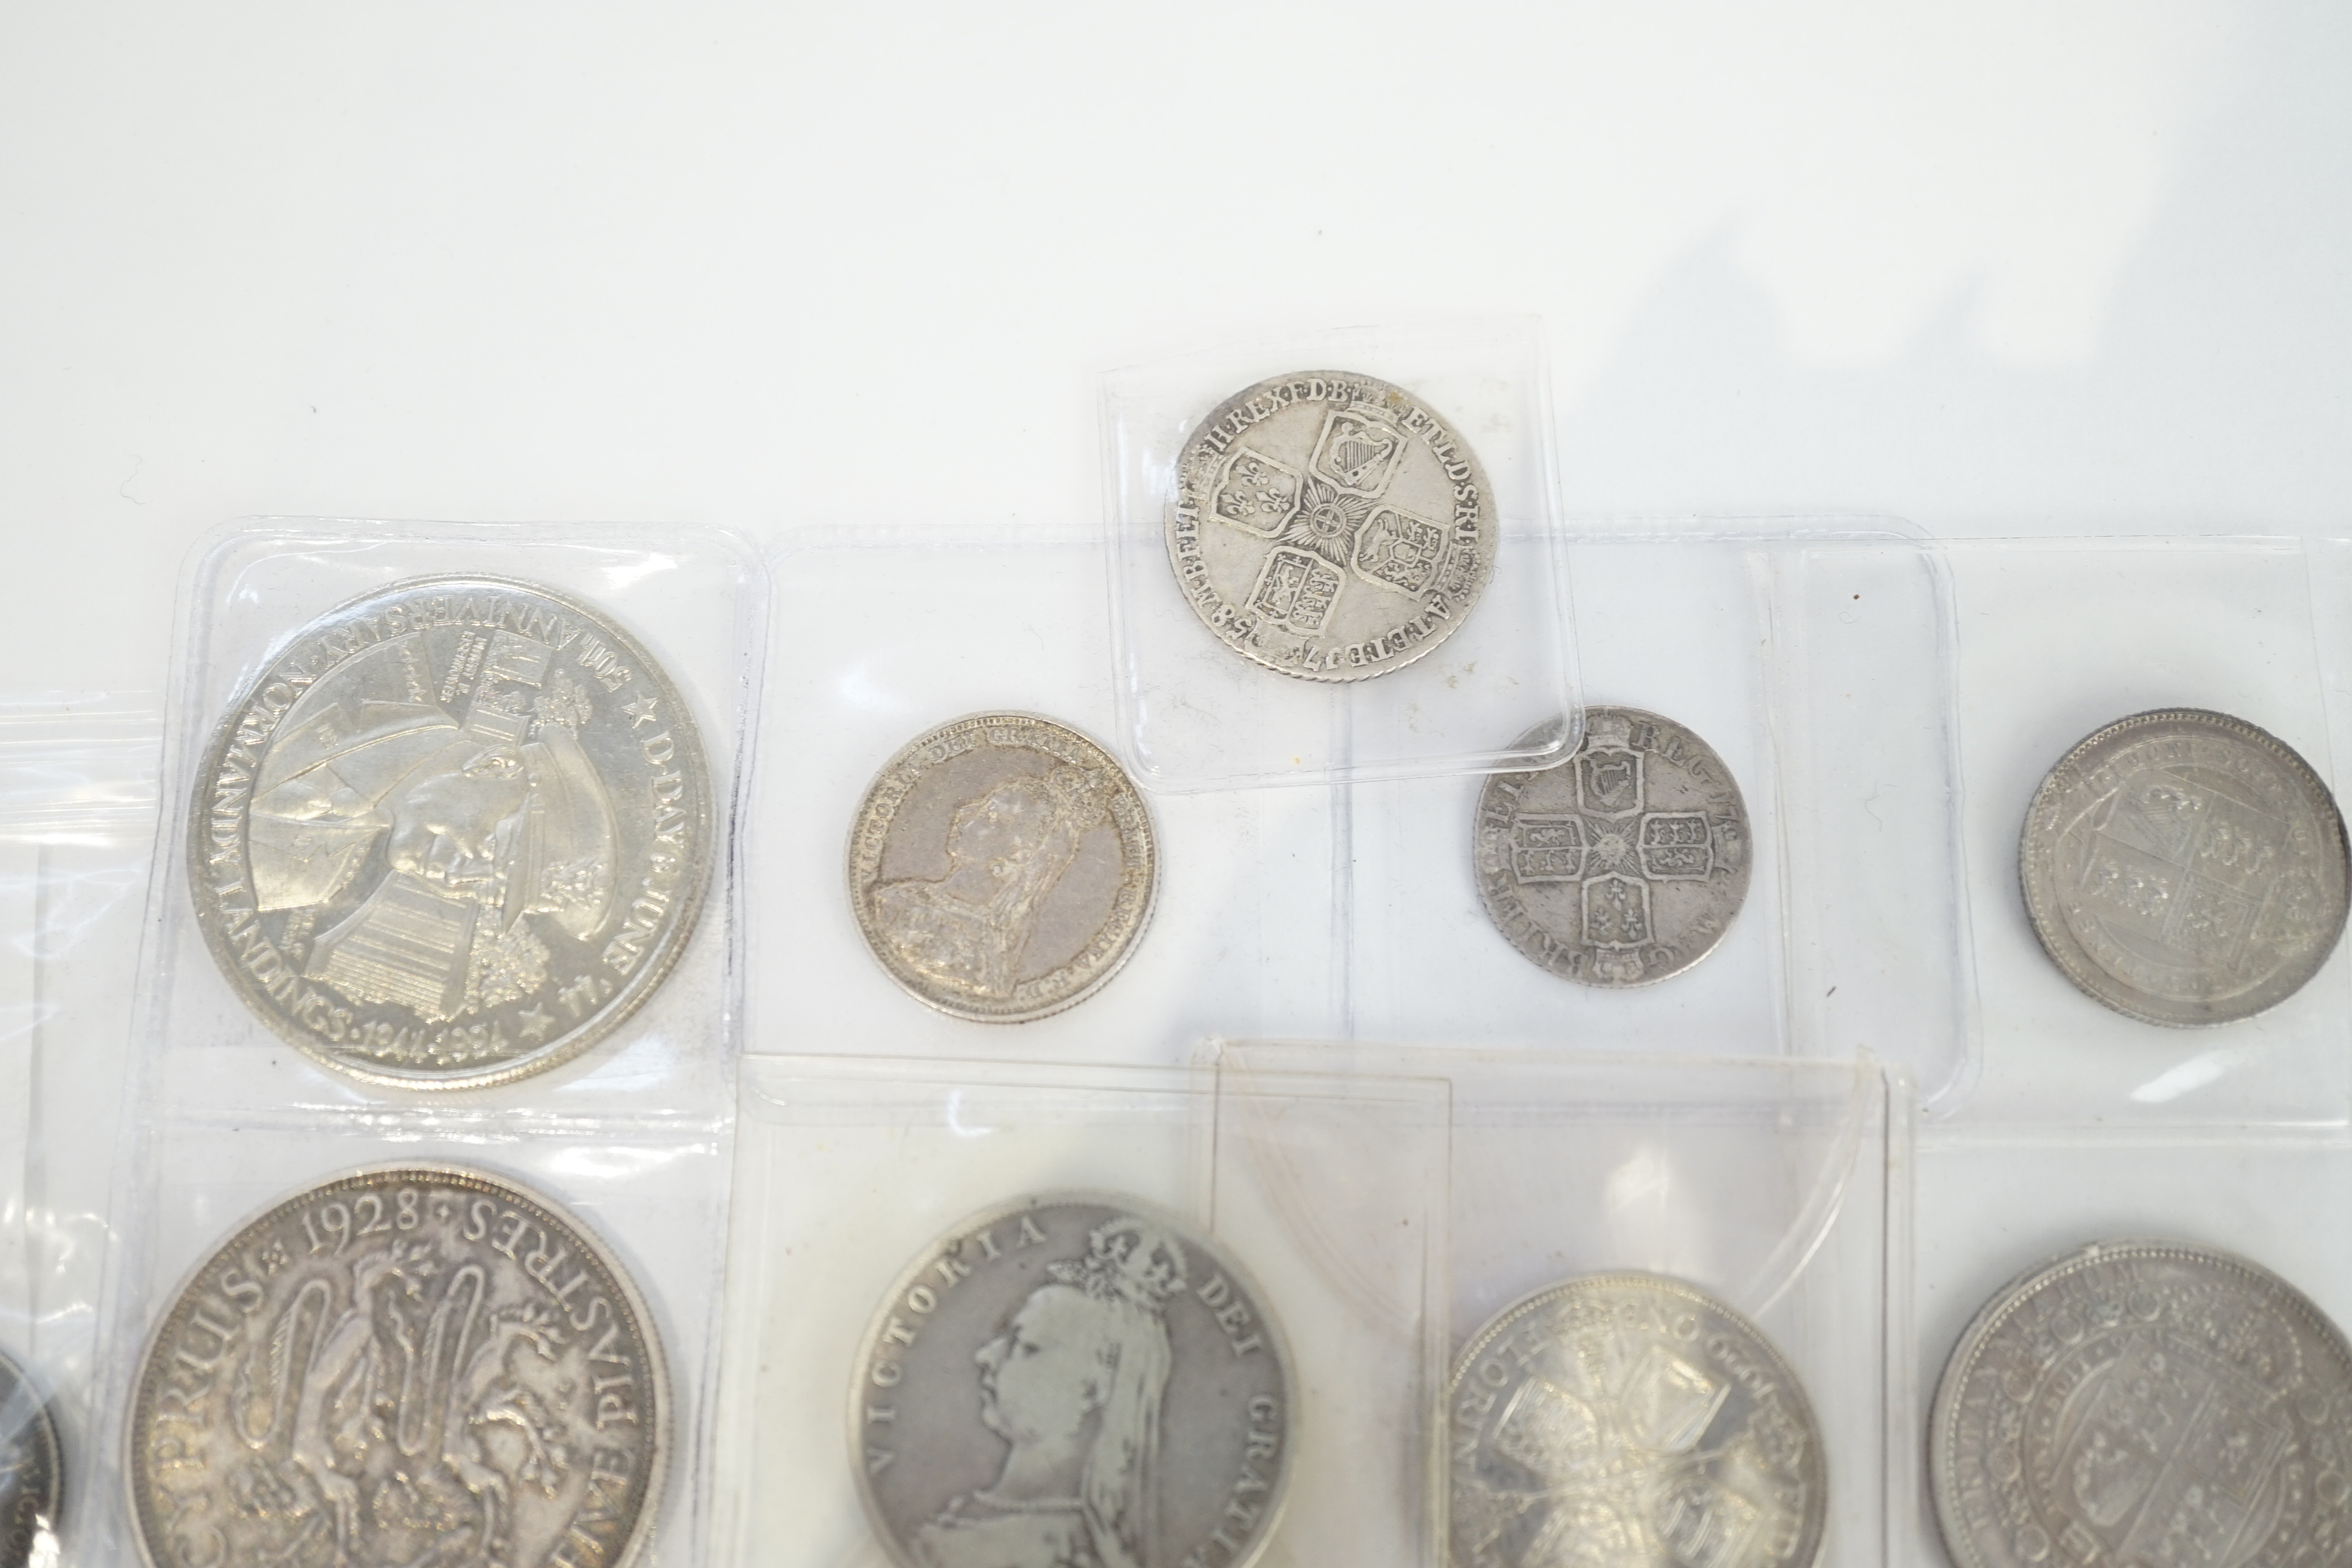 British and British crown dependency coins, 18th-20th century, to include George II shilling, 1758, fine or better, Anne sixpence, five halfcrowns, 1888, good VF, 1887, VF, 1889, 1883 and 1930, two florins, 1887, EF, 192